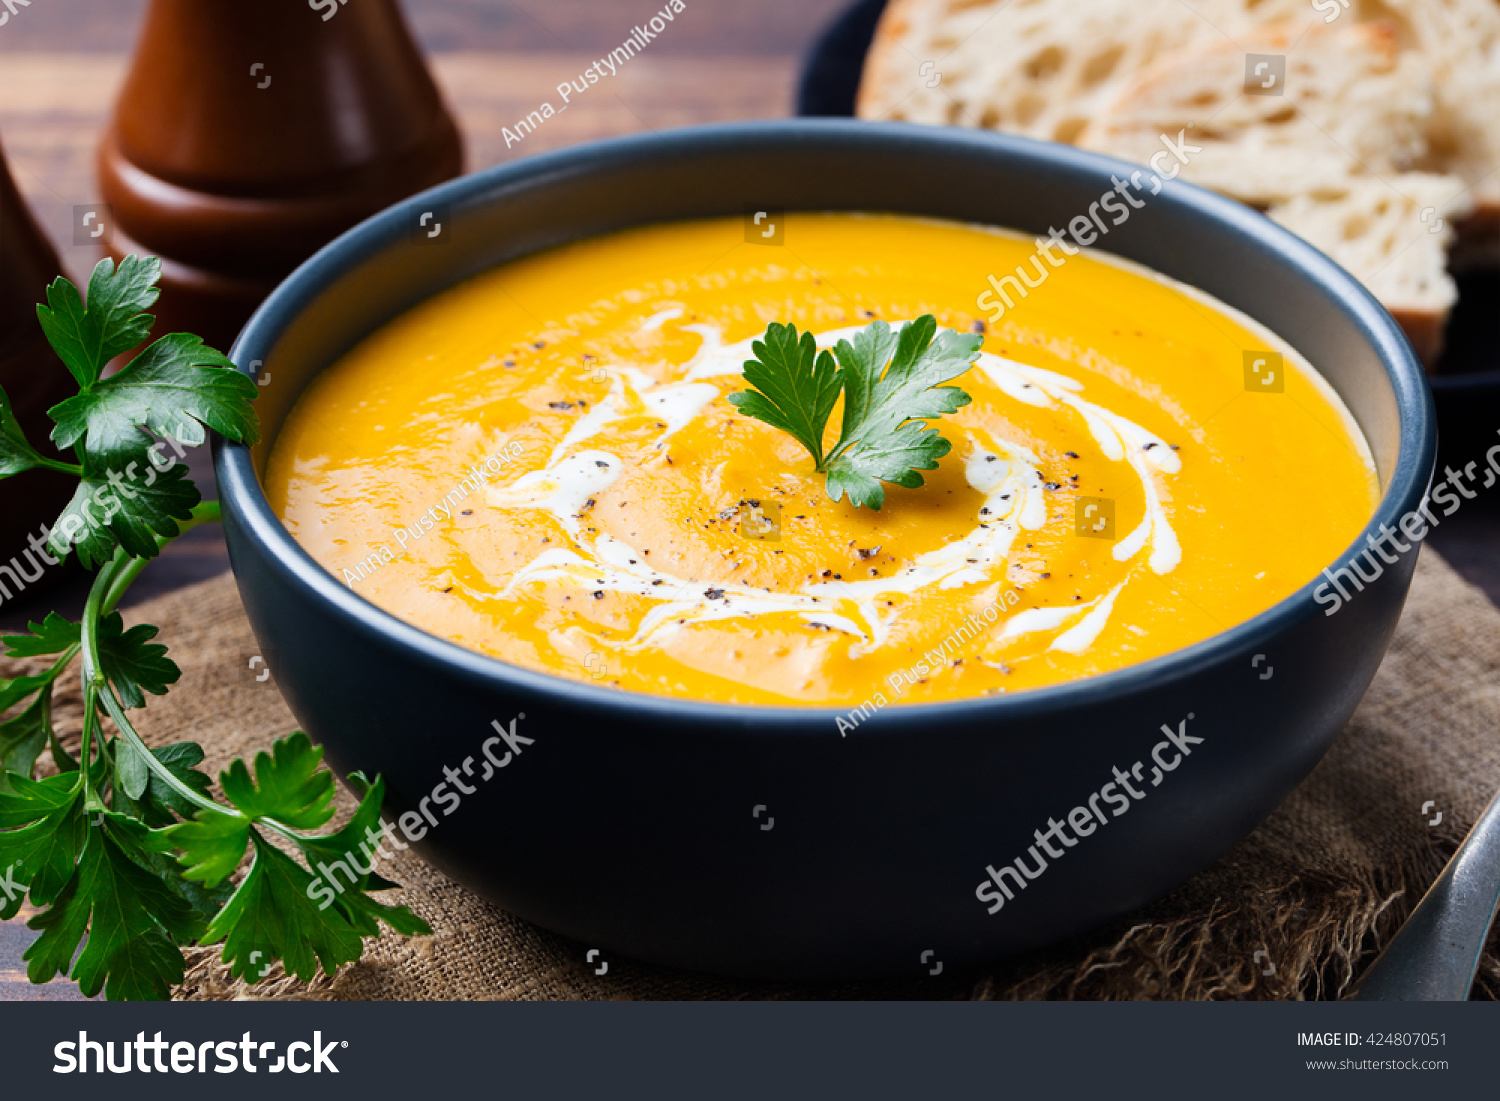 Pumpkin and carrot soup with cream and parsley on dark wooden background #424807051